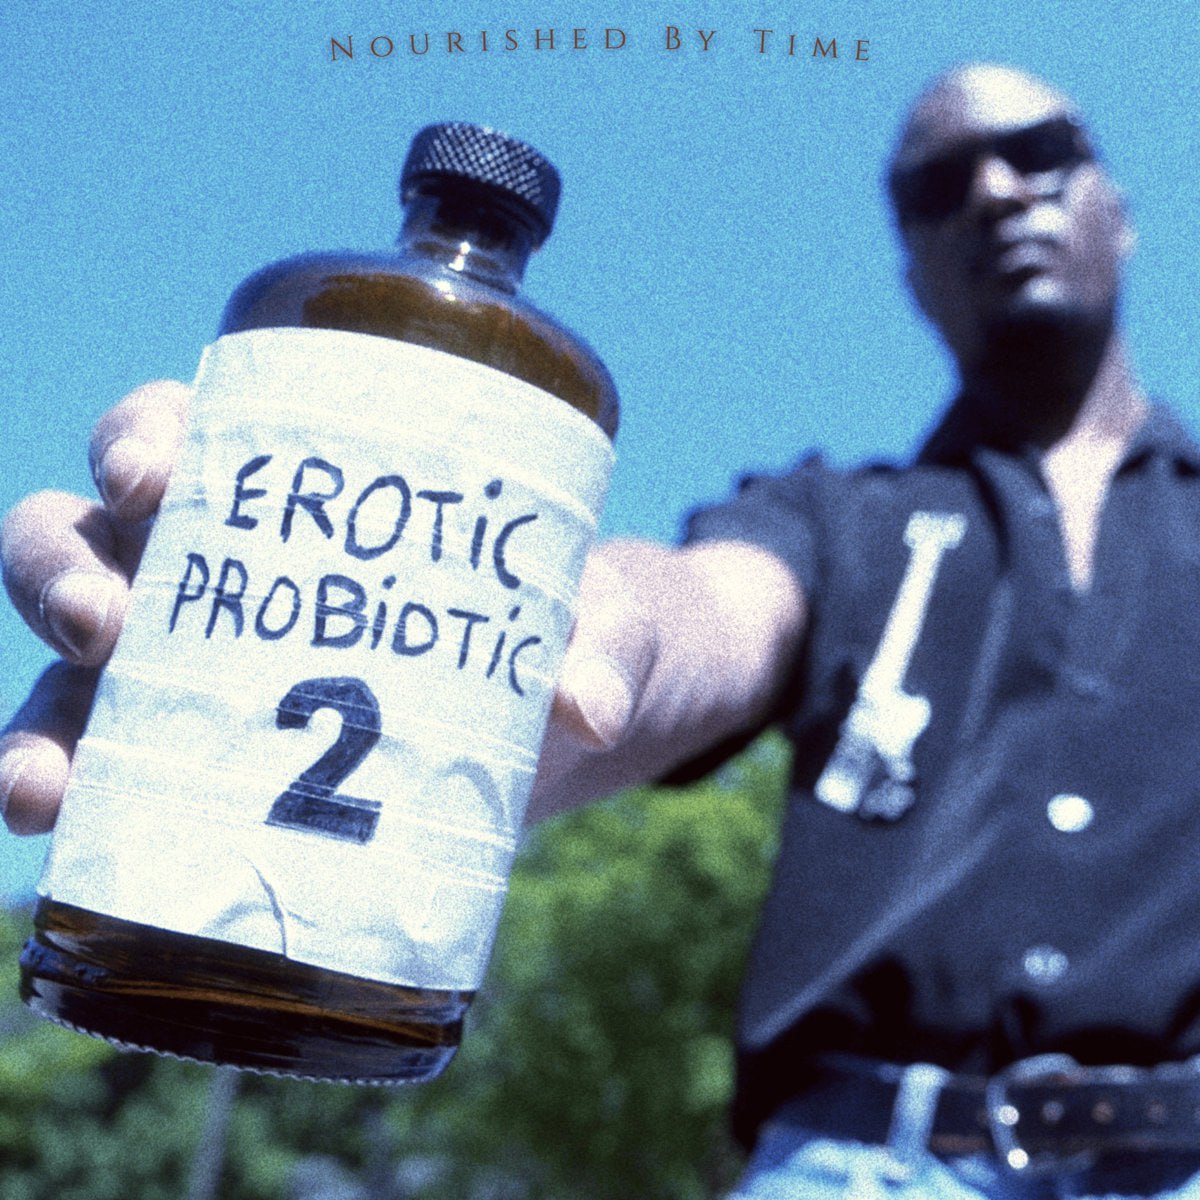 Nourished by Time Erotic Probiotic 2 cover artwork